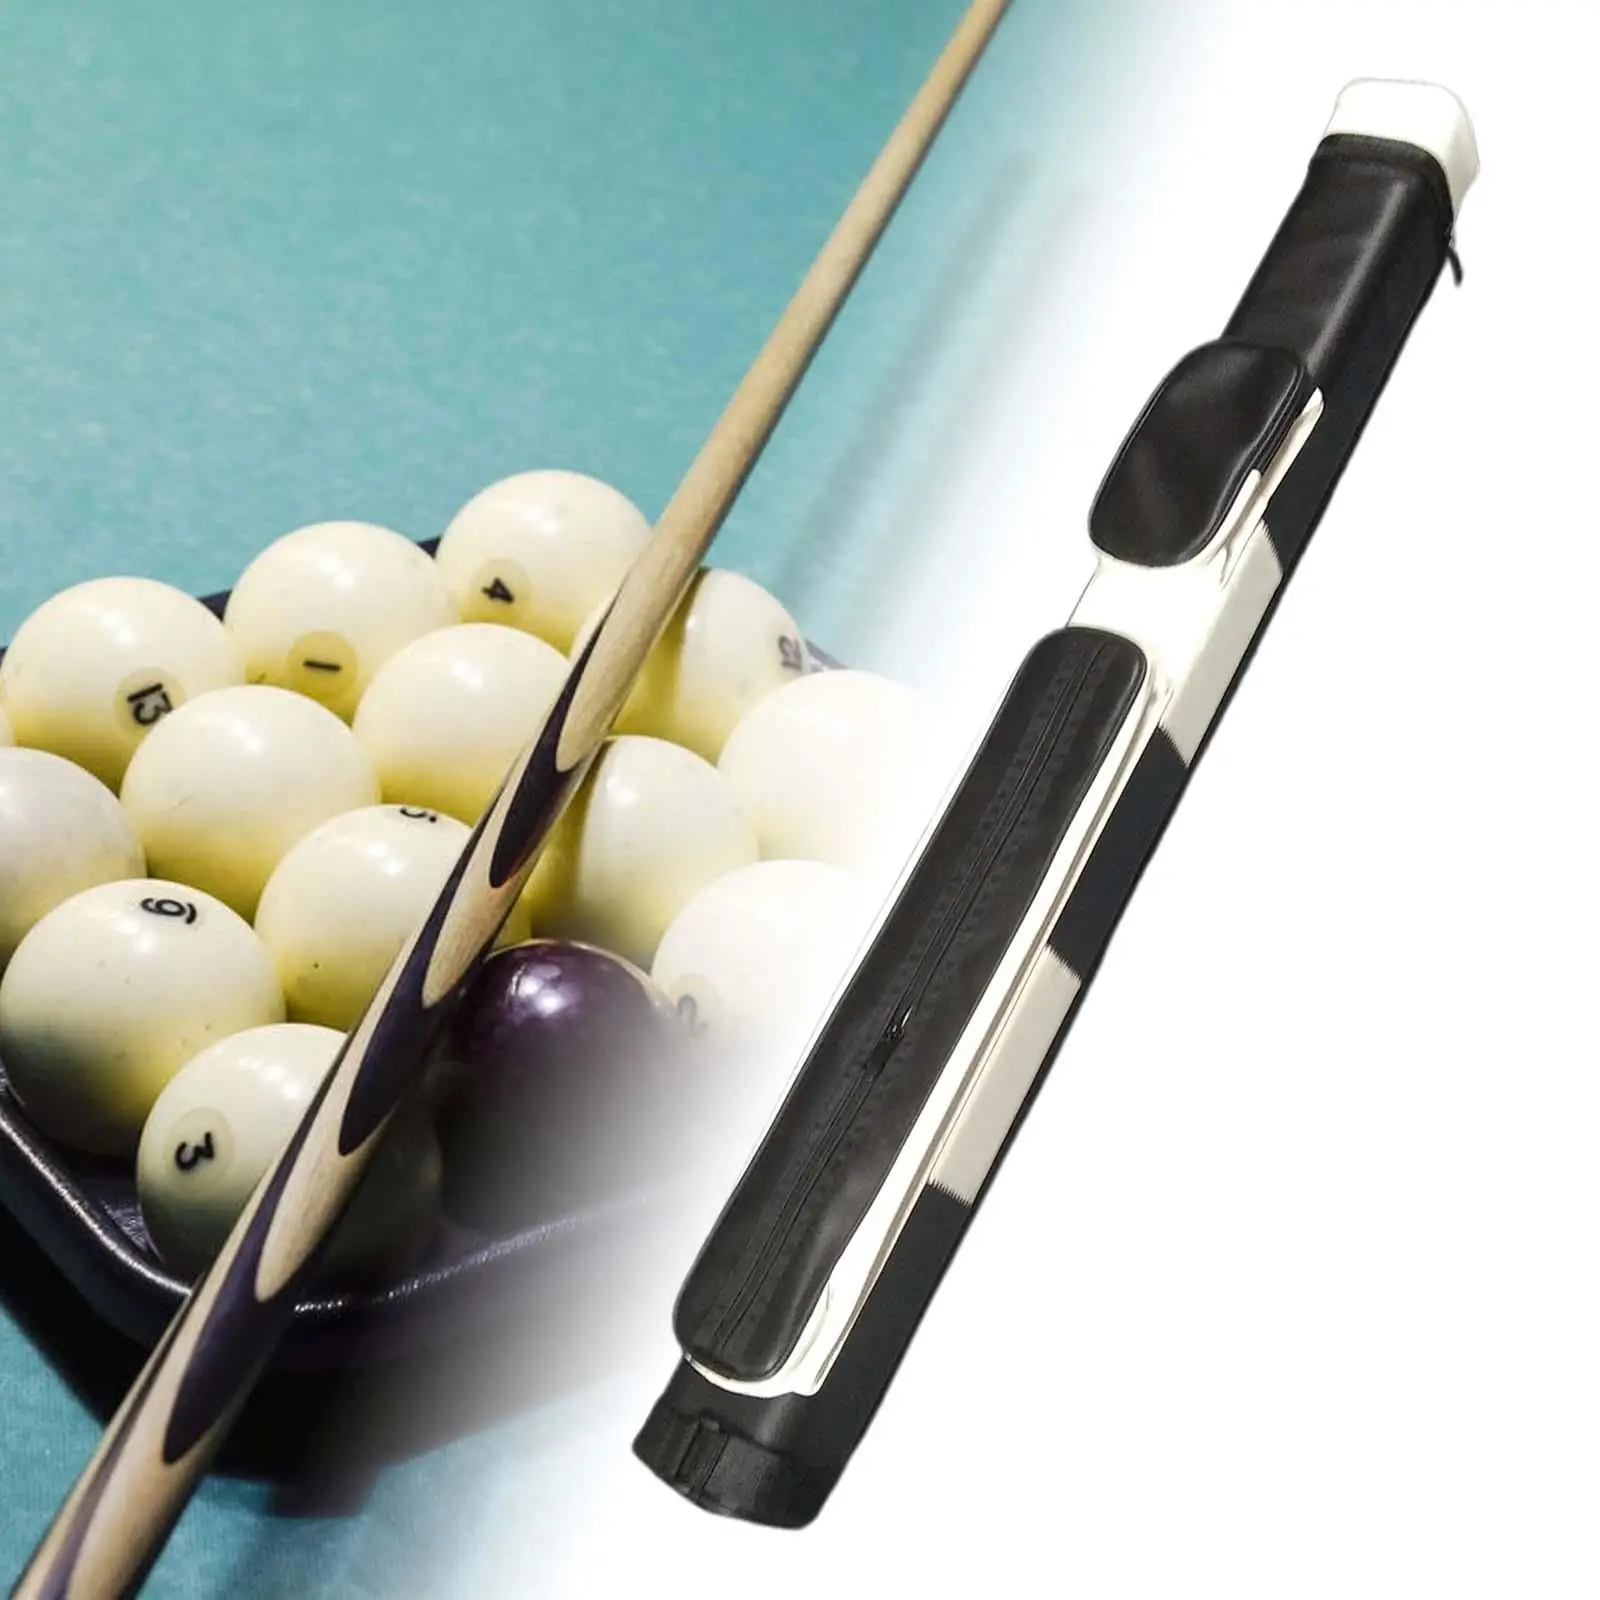 Billiard Pool Cue Sticks Carrying Case with Side Pocket Portable Pool Cue Case Billiards Accessories